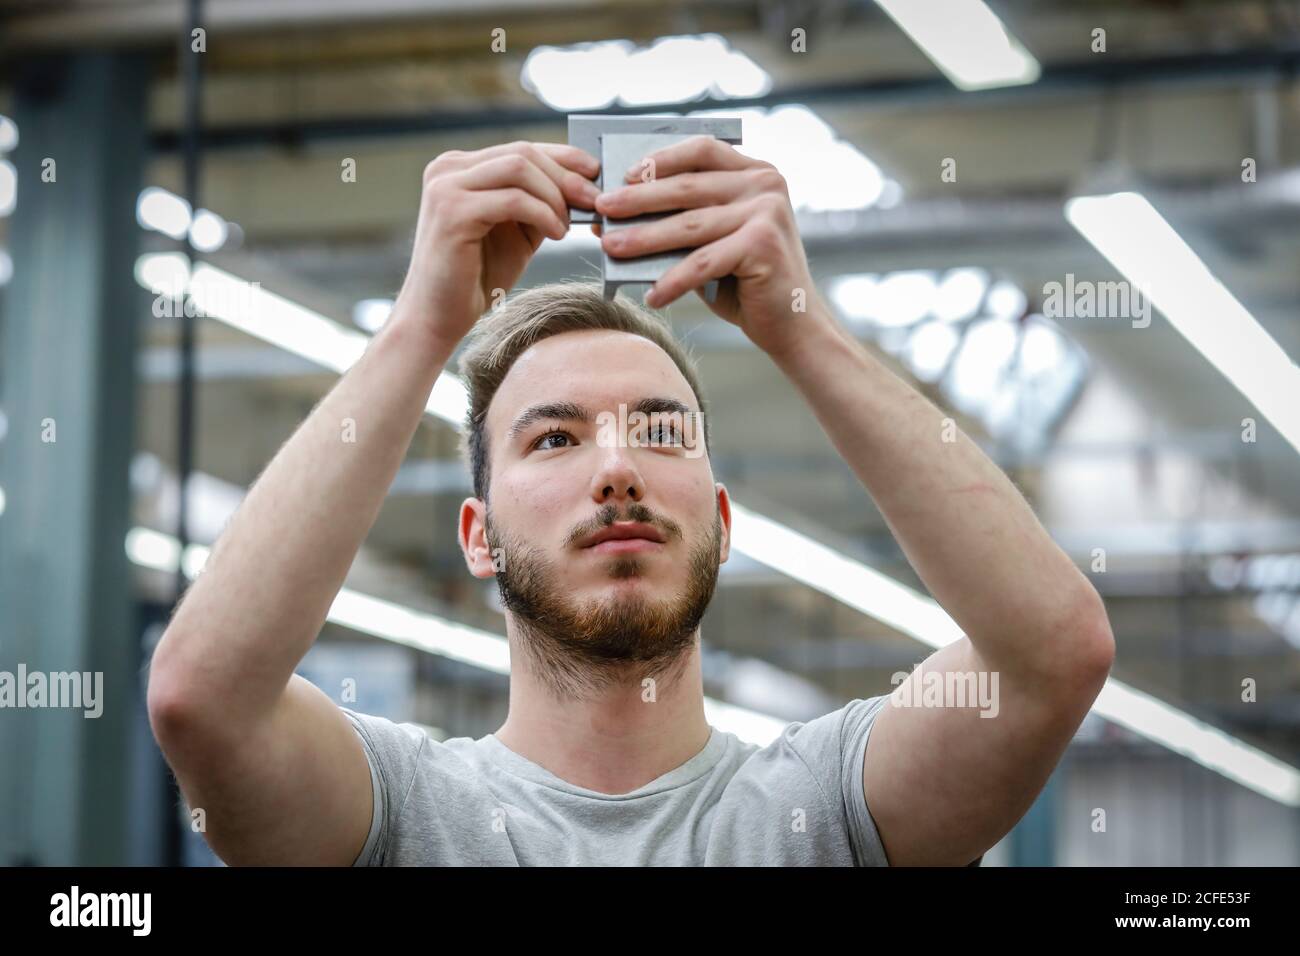 Remscheid, North Rhine-Westphalia, Germany - apprentices in metal professions here at the basic training, vocational training center of the Remscheid Stock Photo